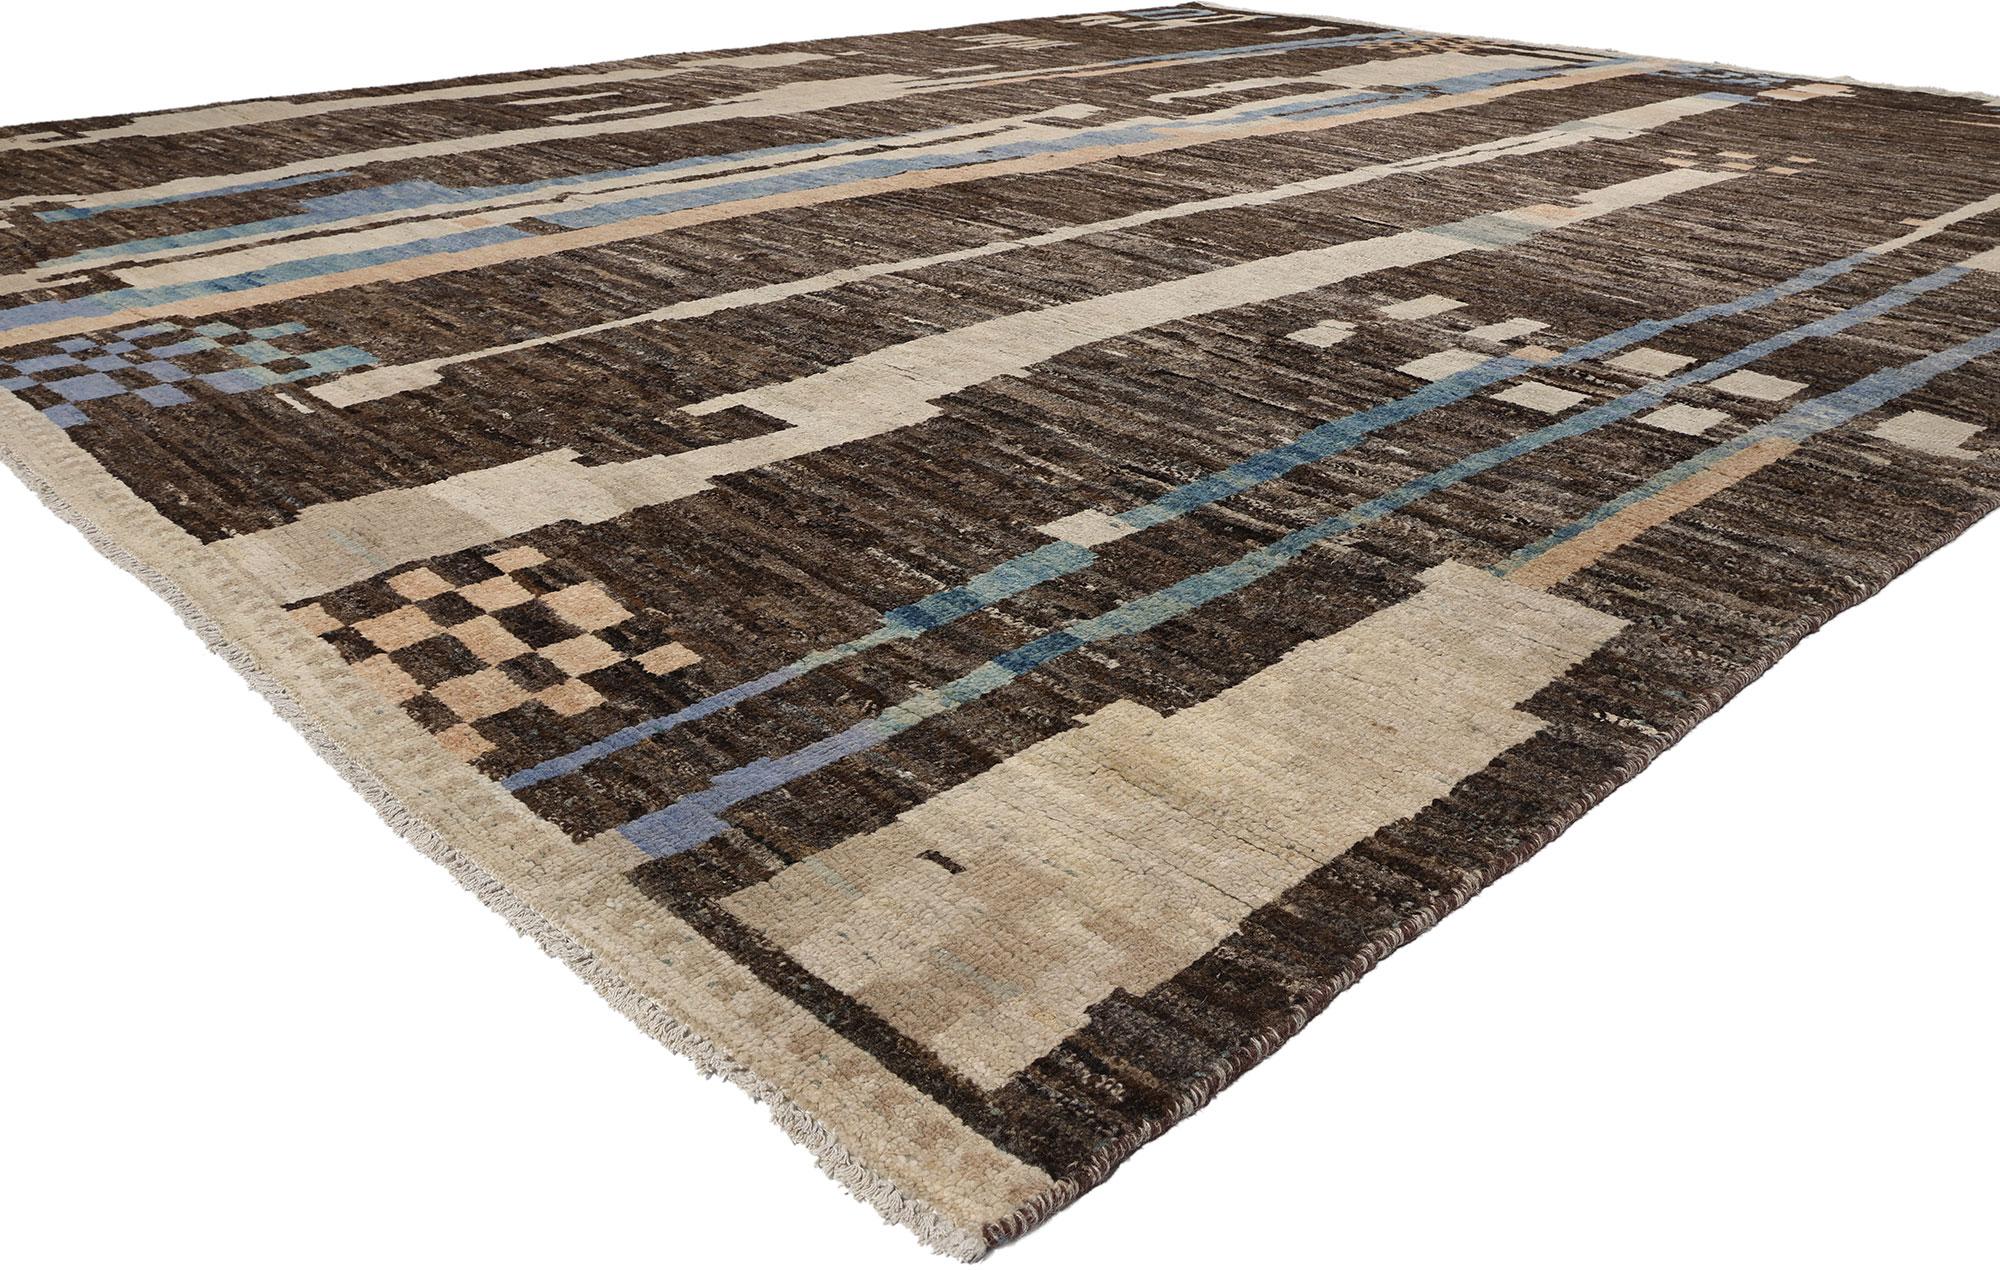 81065 Organic Modern Brutalist Moroccan Rug, 12'01 x 14'08. Crafted with meticulous attention to detail, this hand-knotted wool Organic Modern Moroccan area rug serves as a captivating exploration of form, texture, emotion, and our innate connection